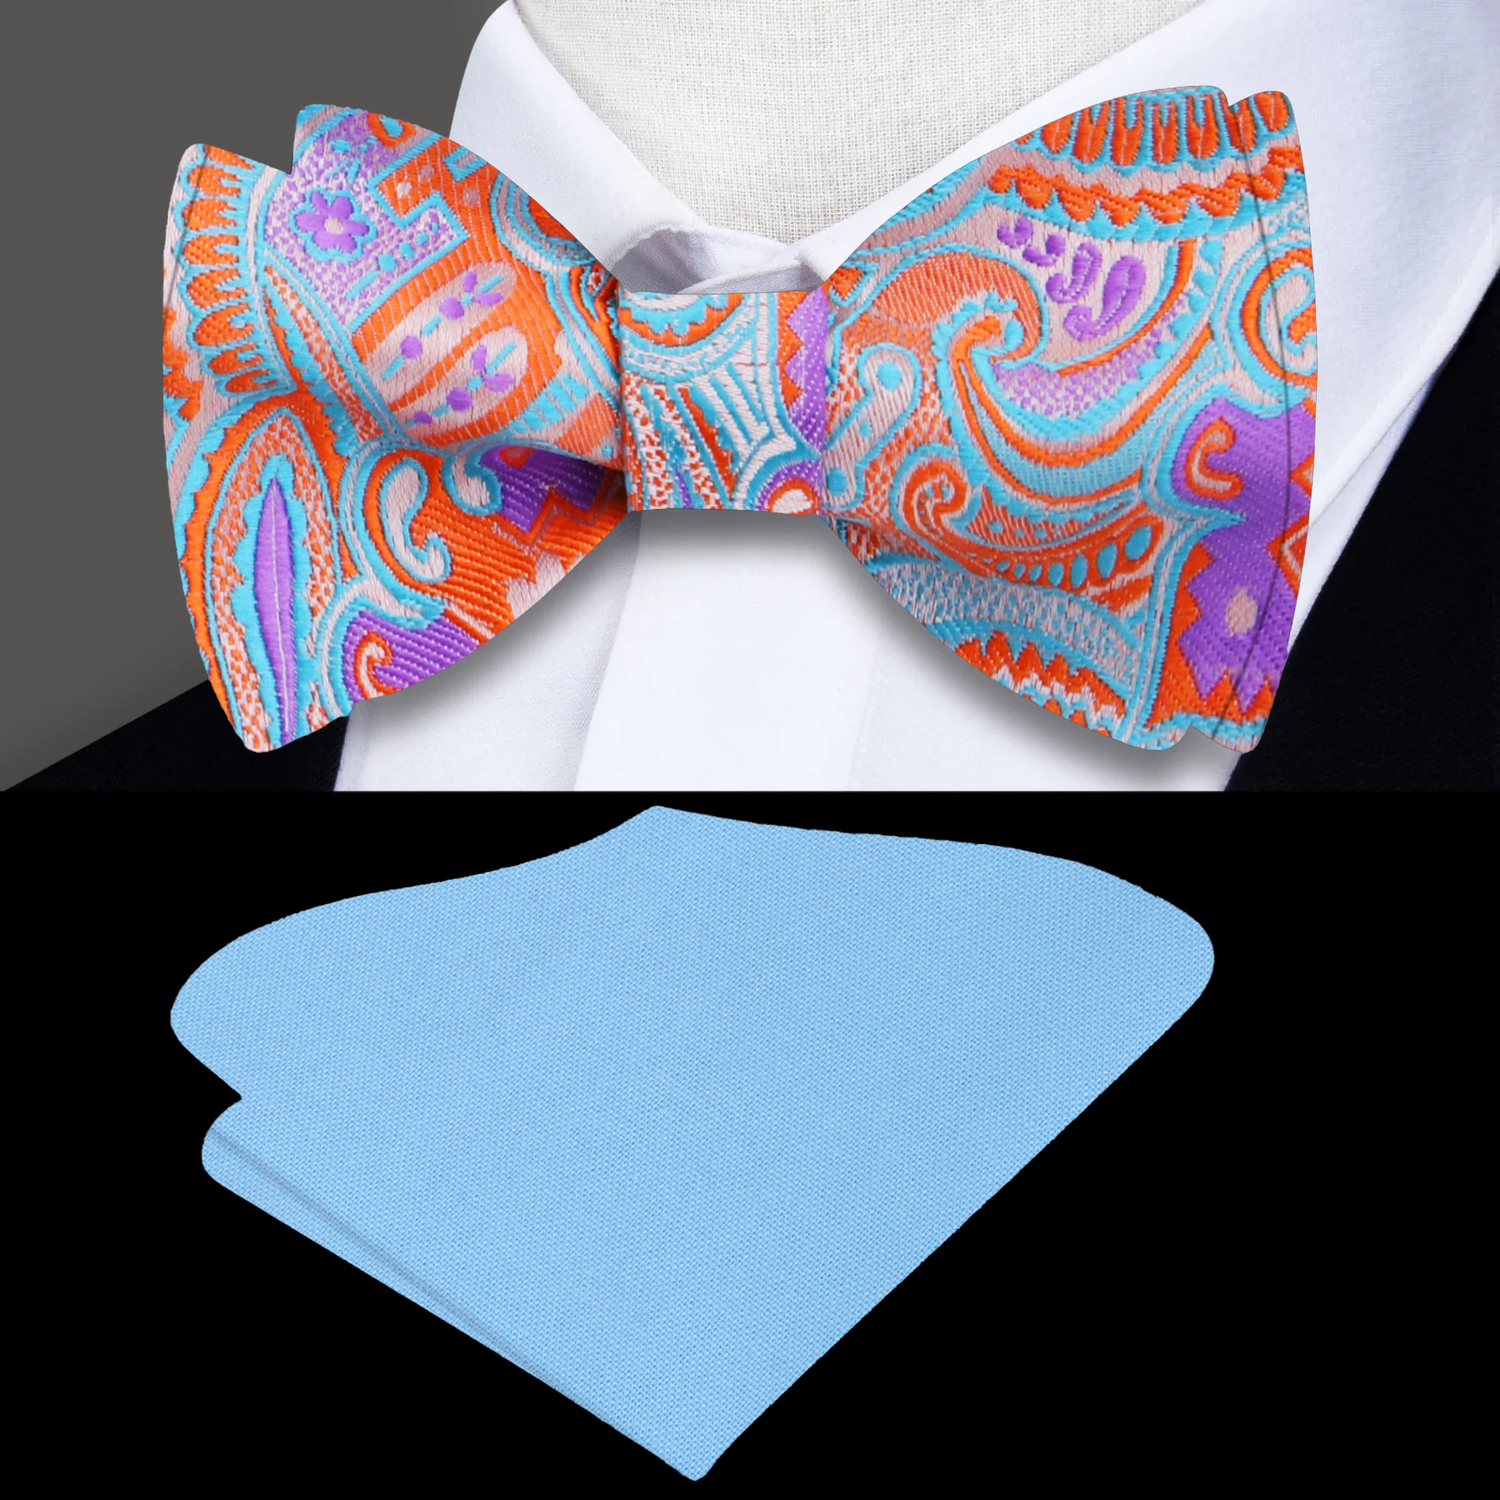 A Purple, Orange, Light Blue Abstract Designs With Paisley Silk Self Tie Bow Tie, Light Blue Pocket Square